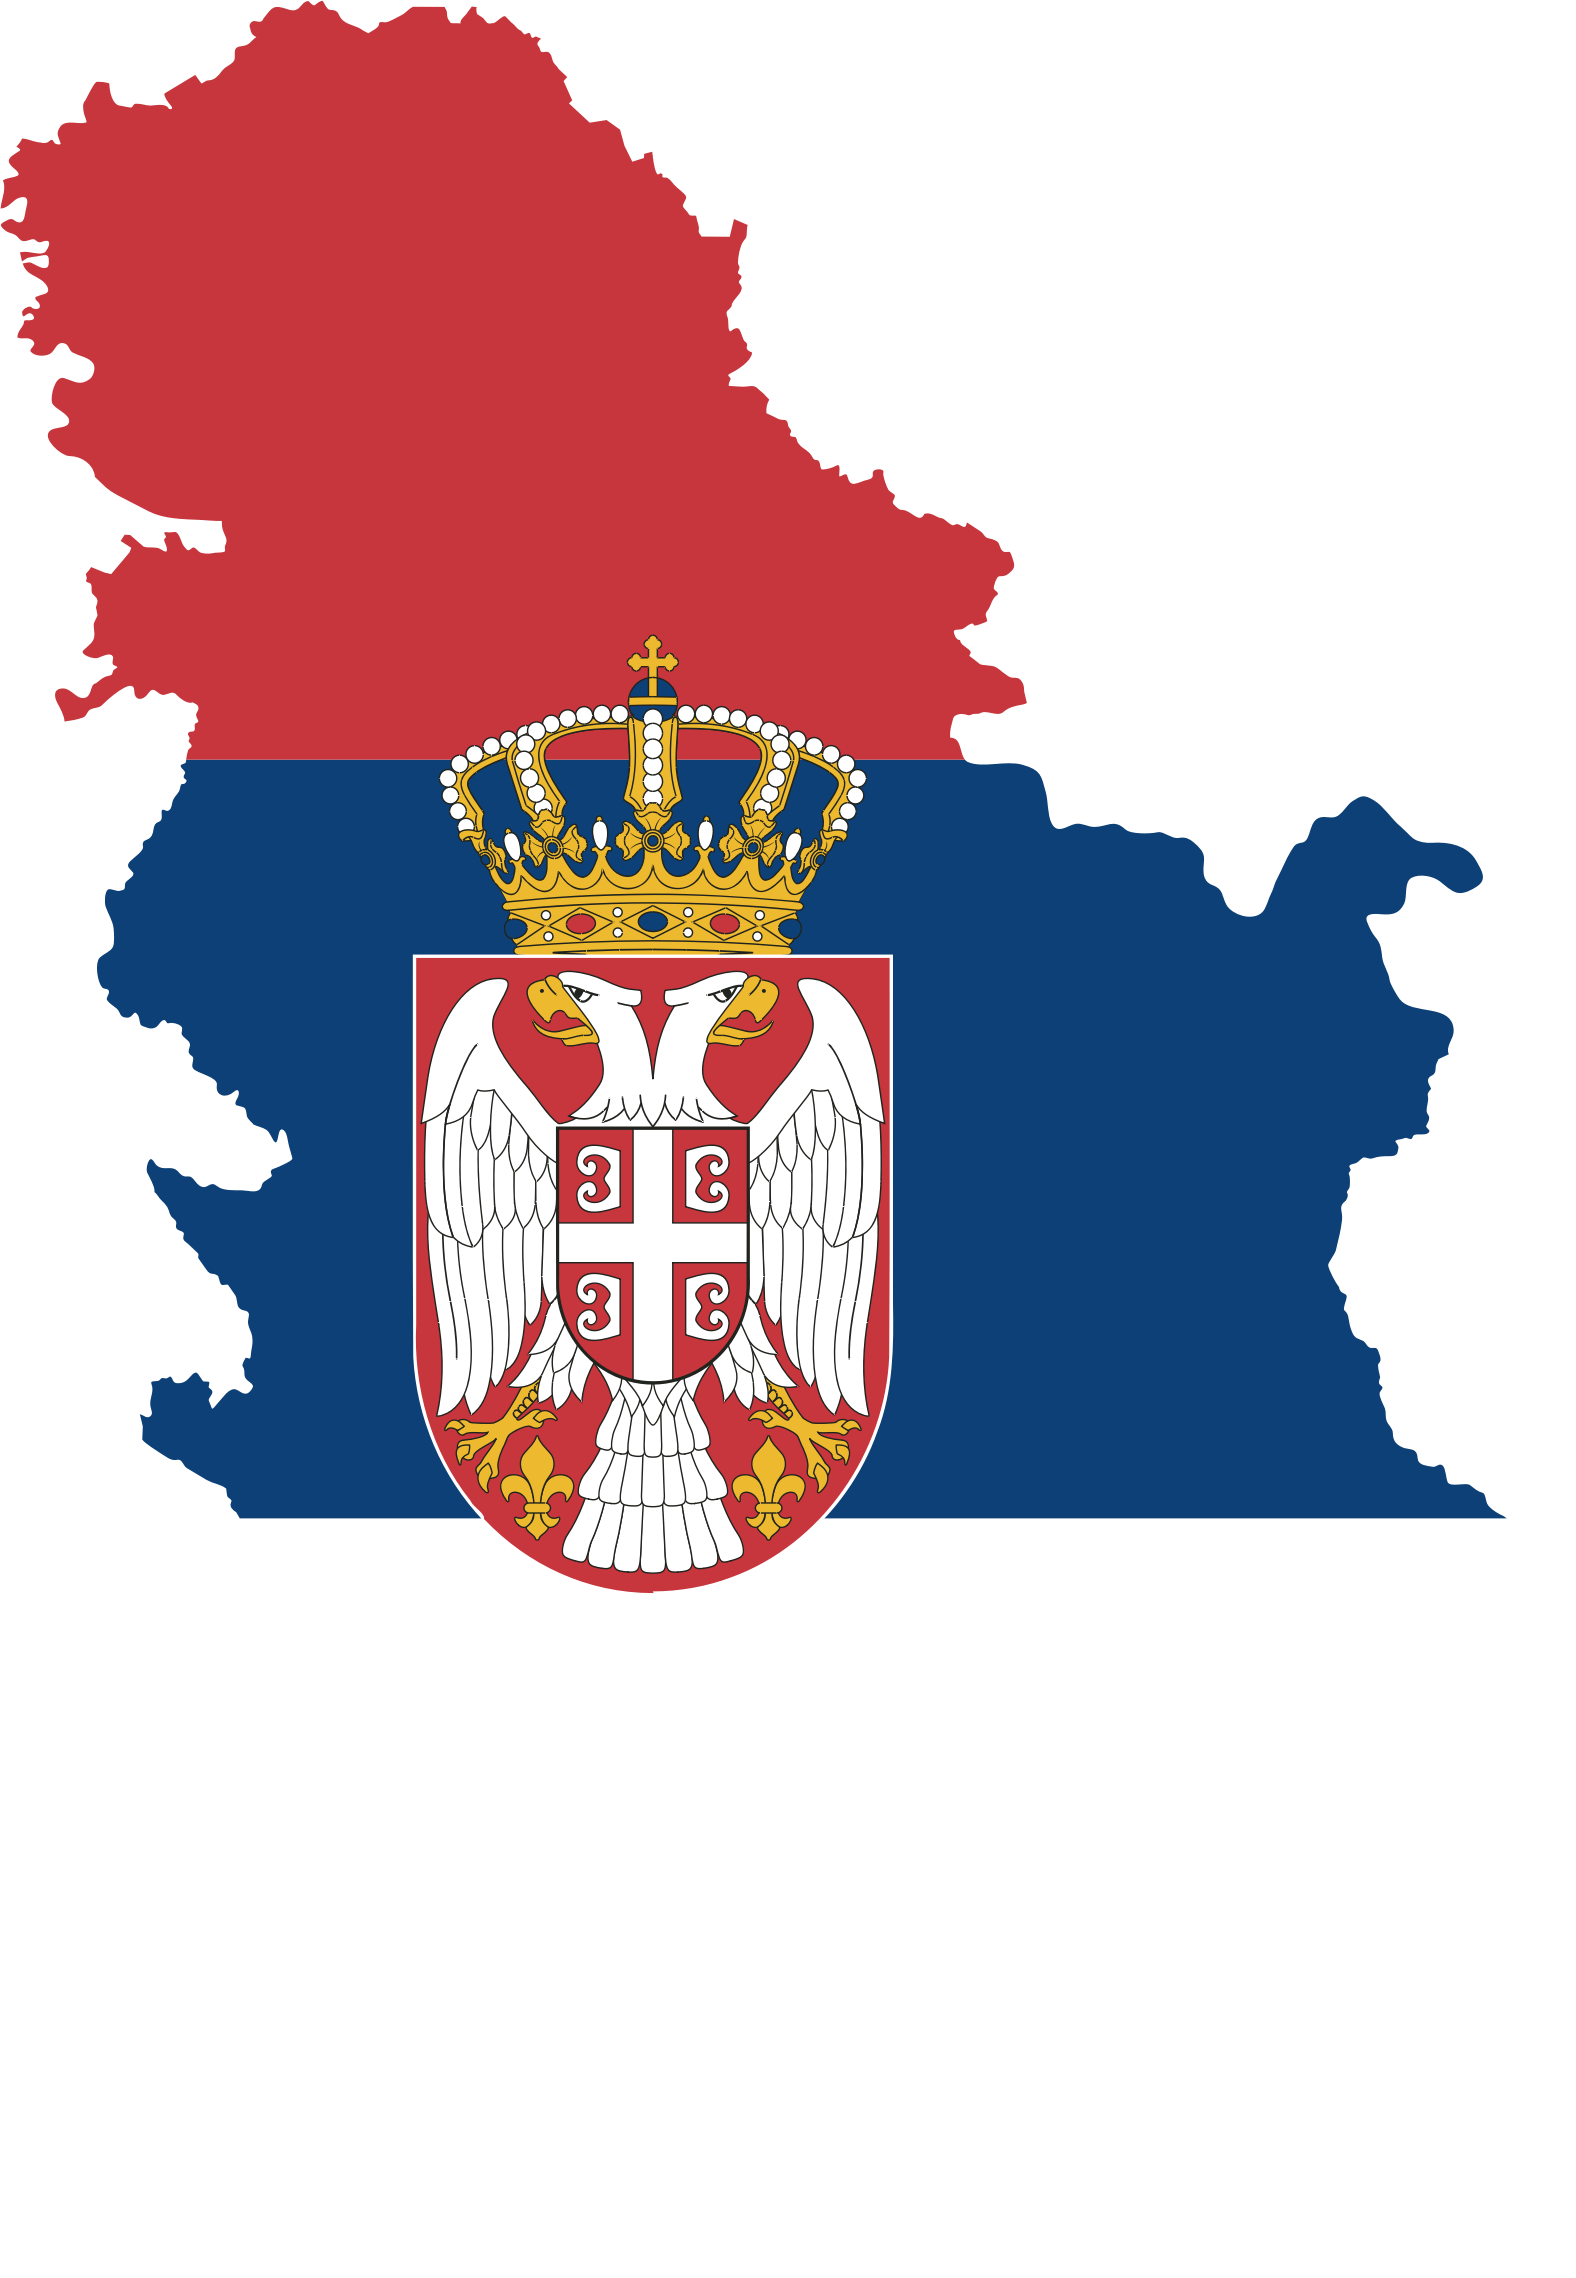 HQ Flag Of Serbia Wallpapers | File 286.74Kb